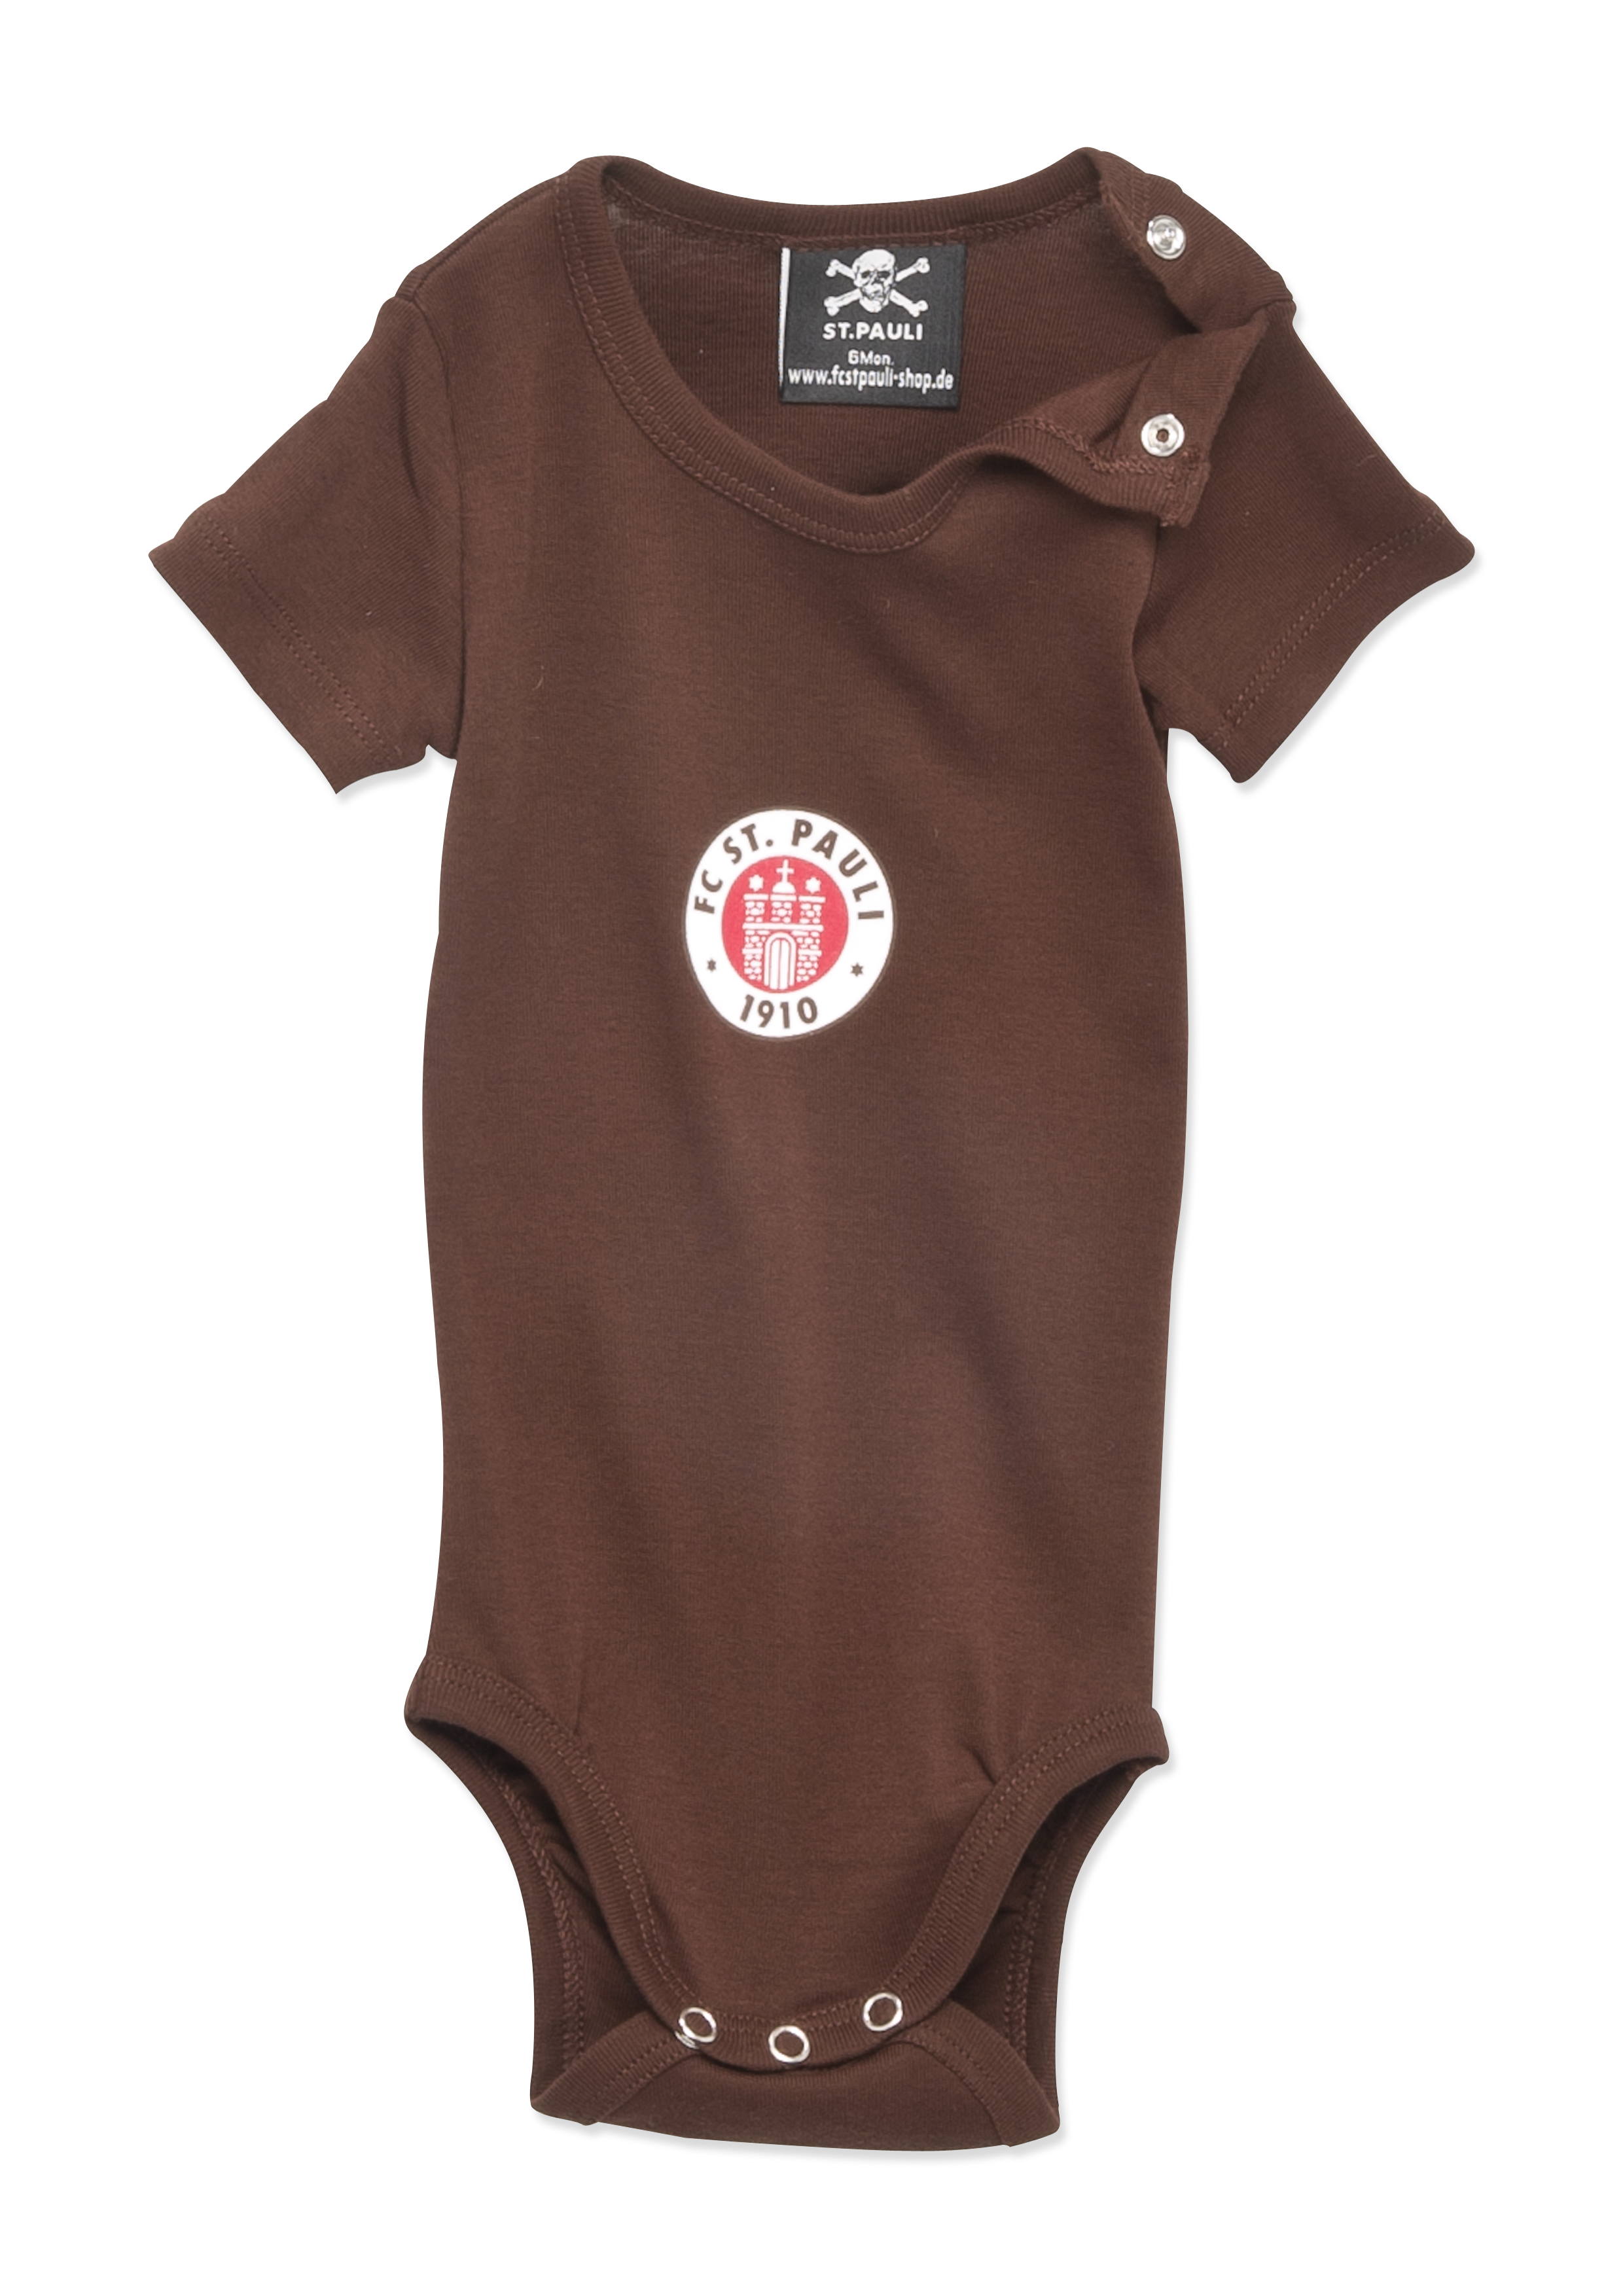 Baby bodysuit with logo, brown